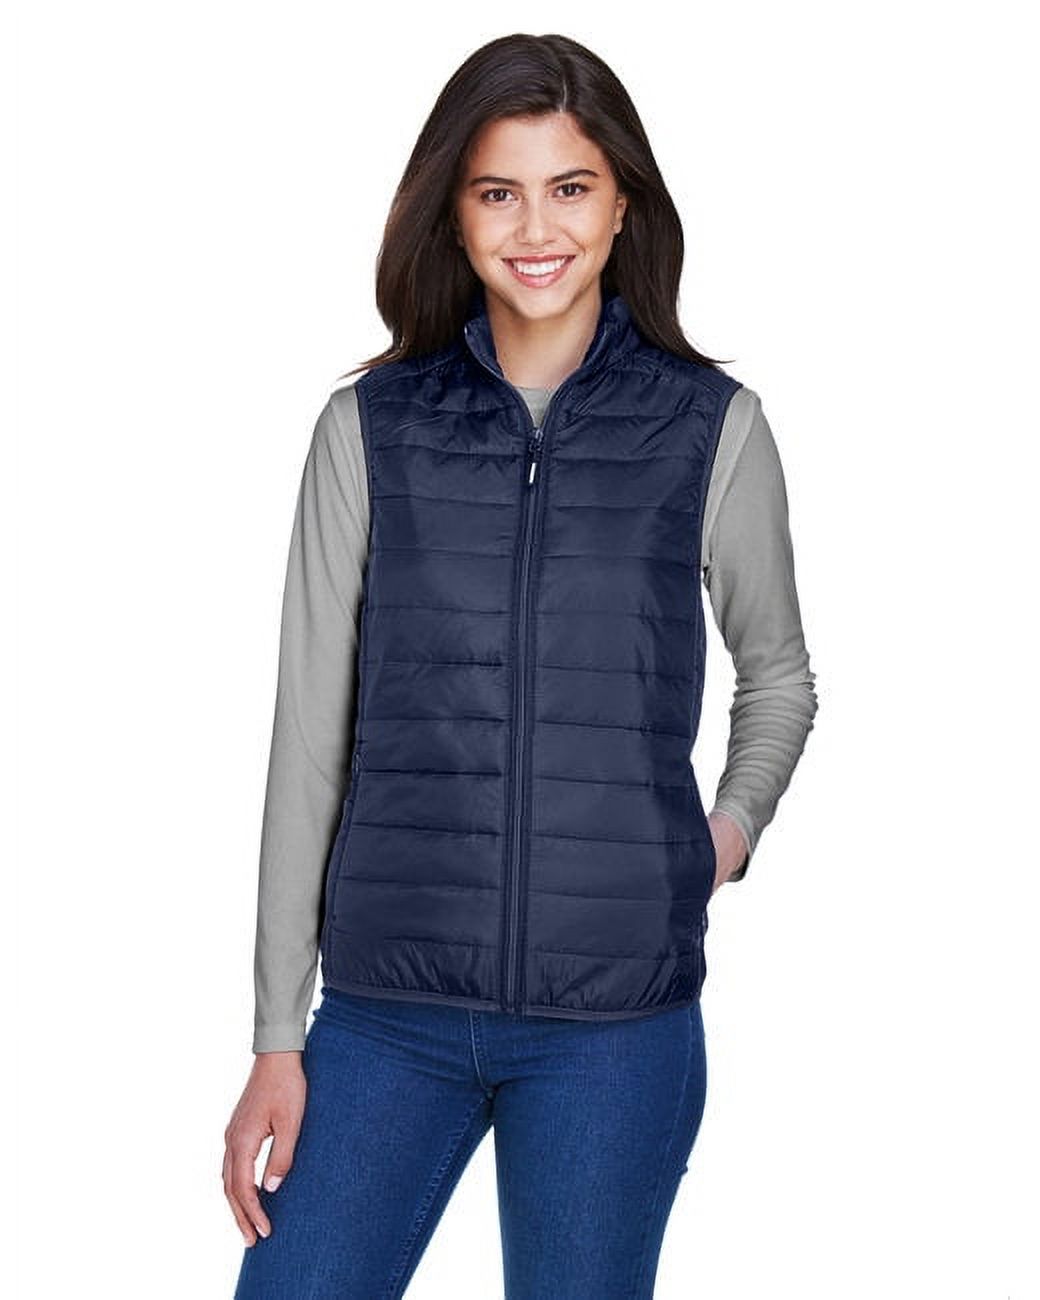 Core 365 CE702W Ladies Prevail Packable Puffer Vest - image 1 of 3